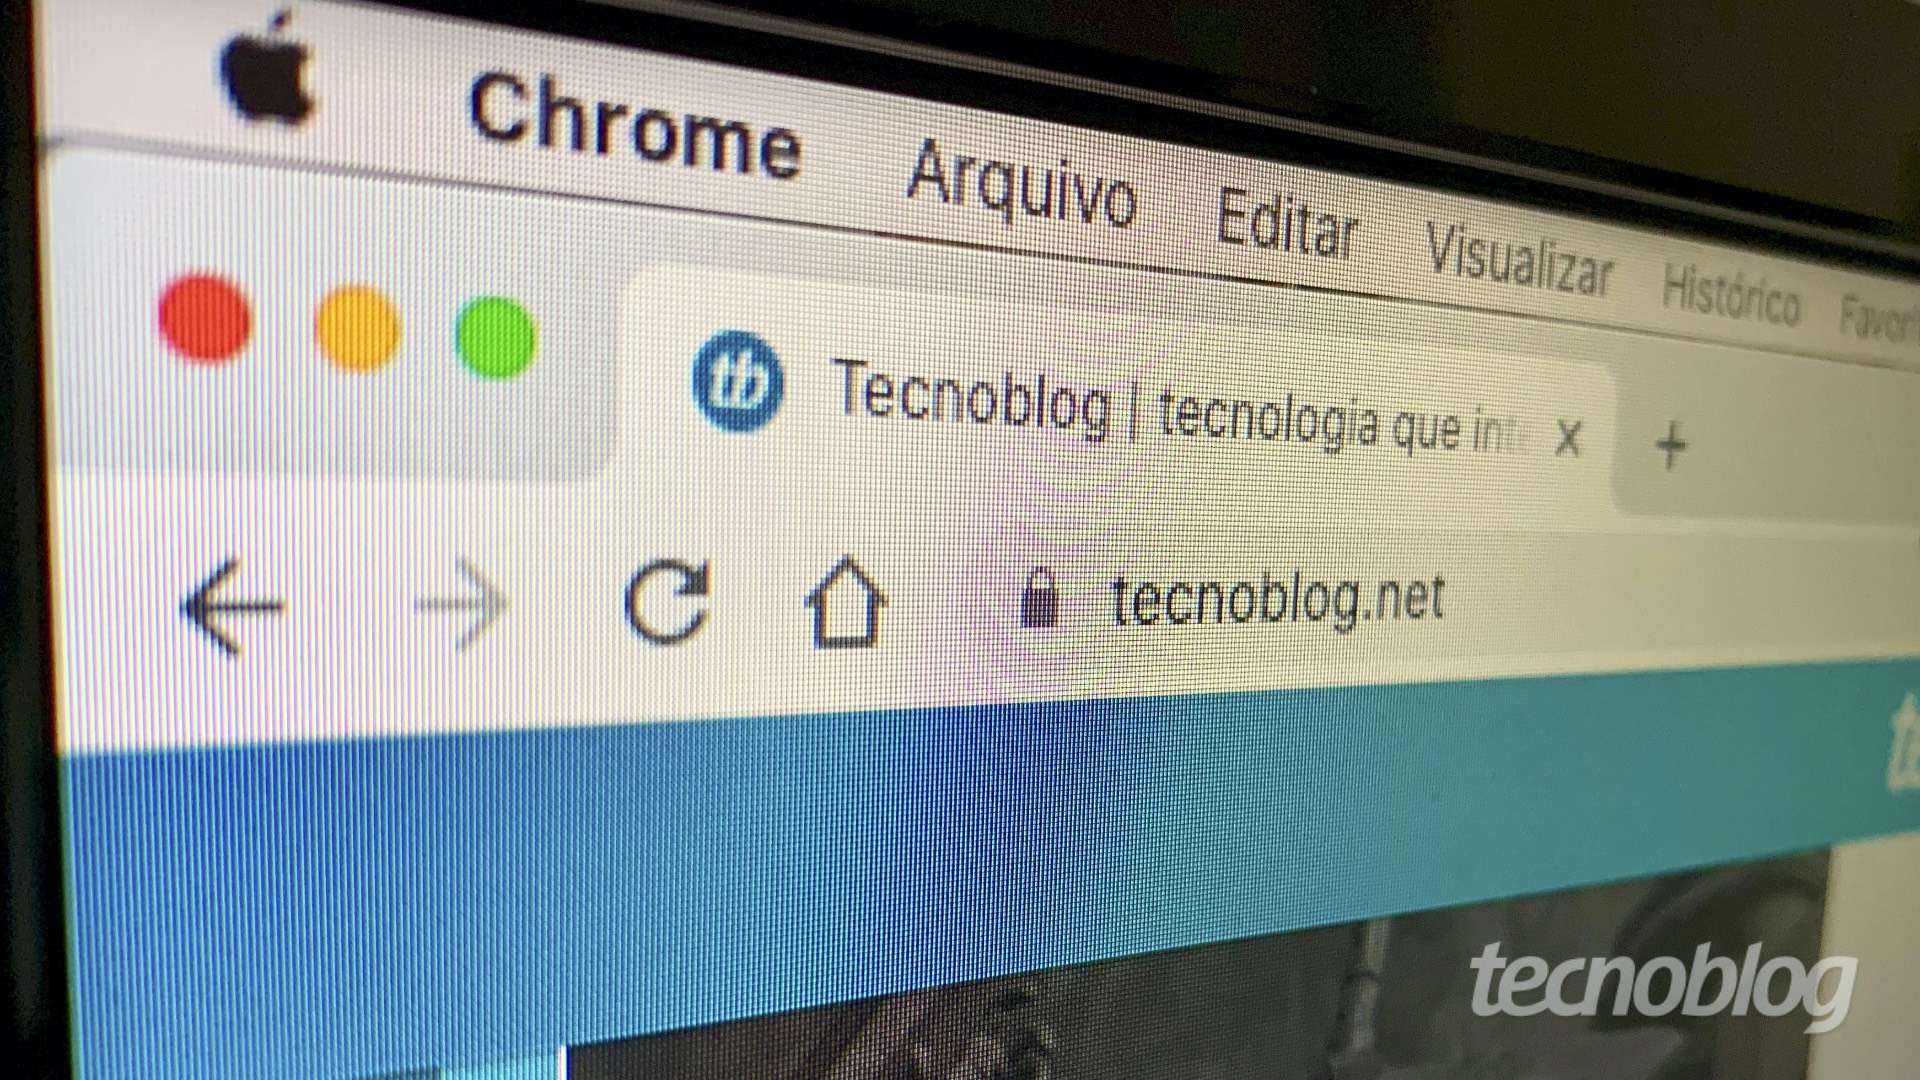 Chrome will change lock icon on HTTPS sites to alert users | Applications and Software